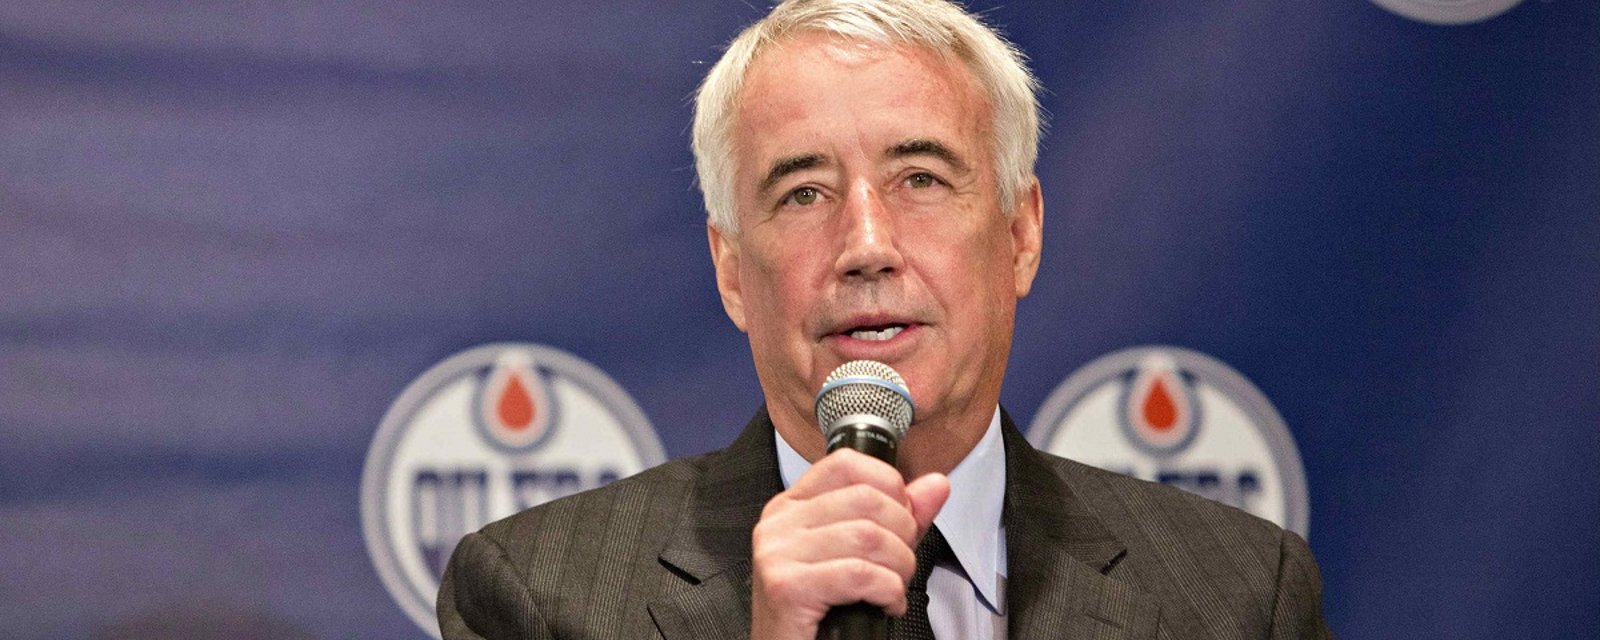 Rumor: Big changes coming to Oilers management, and fans will not be happy.